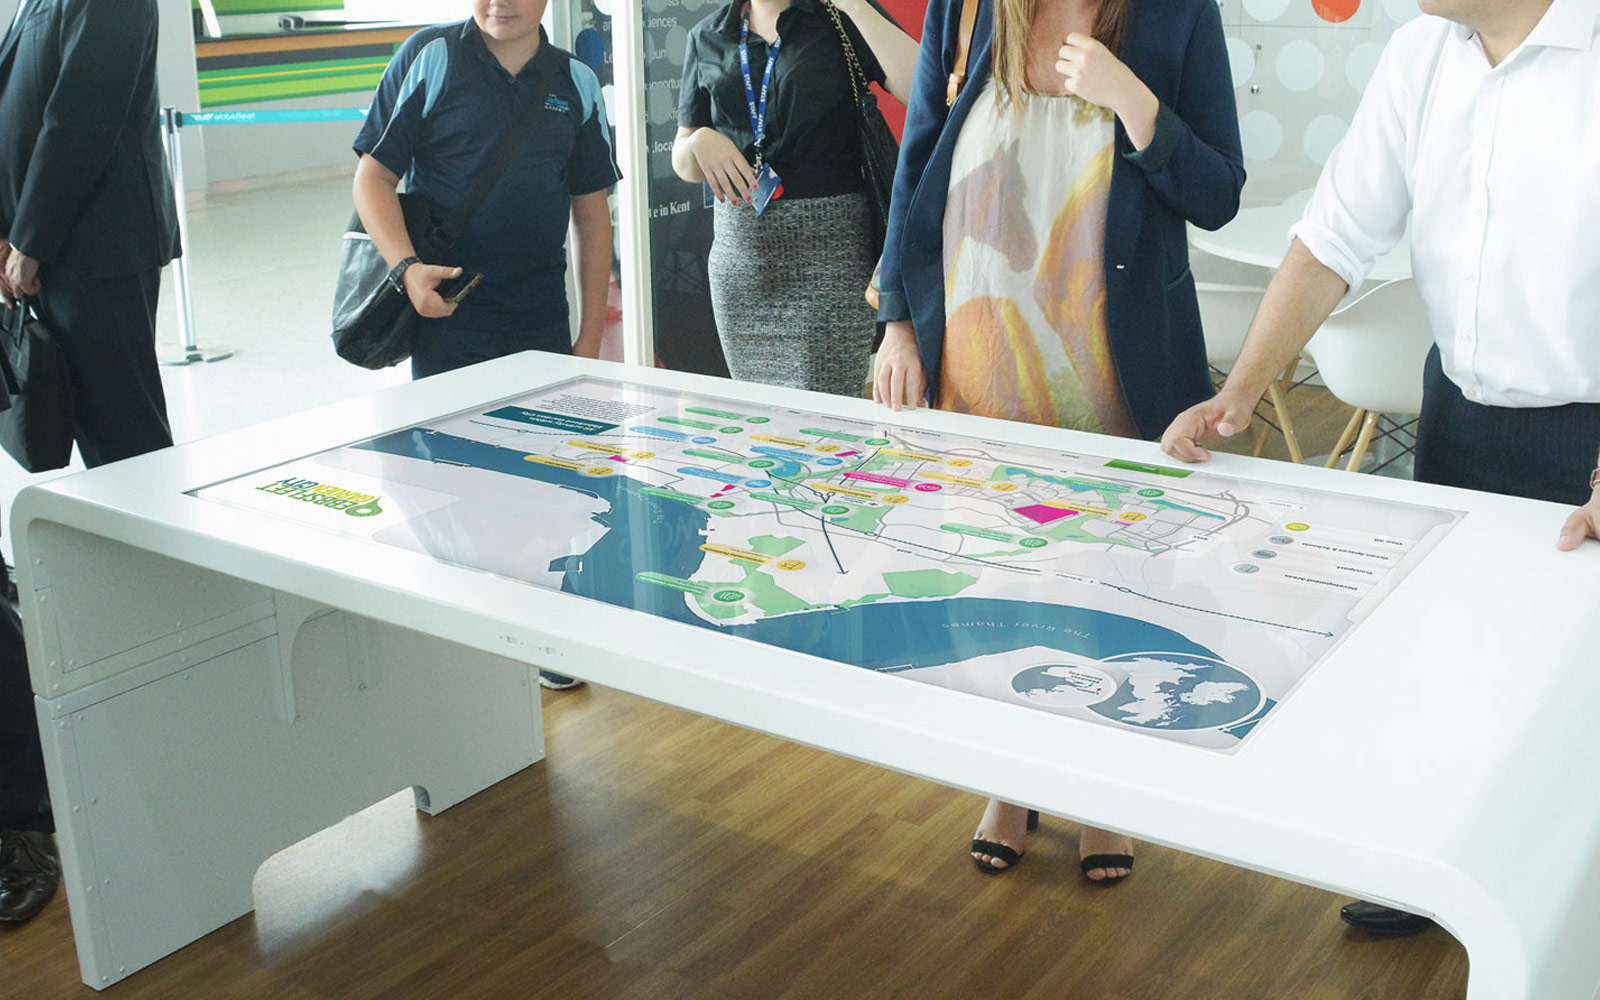 group of people interacting with Ebbsfleet touchscreen display on white table in office